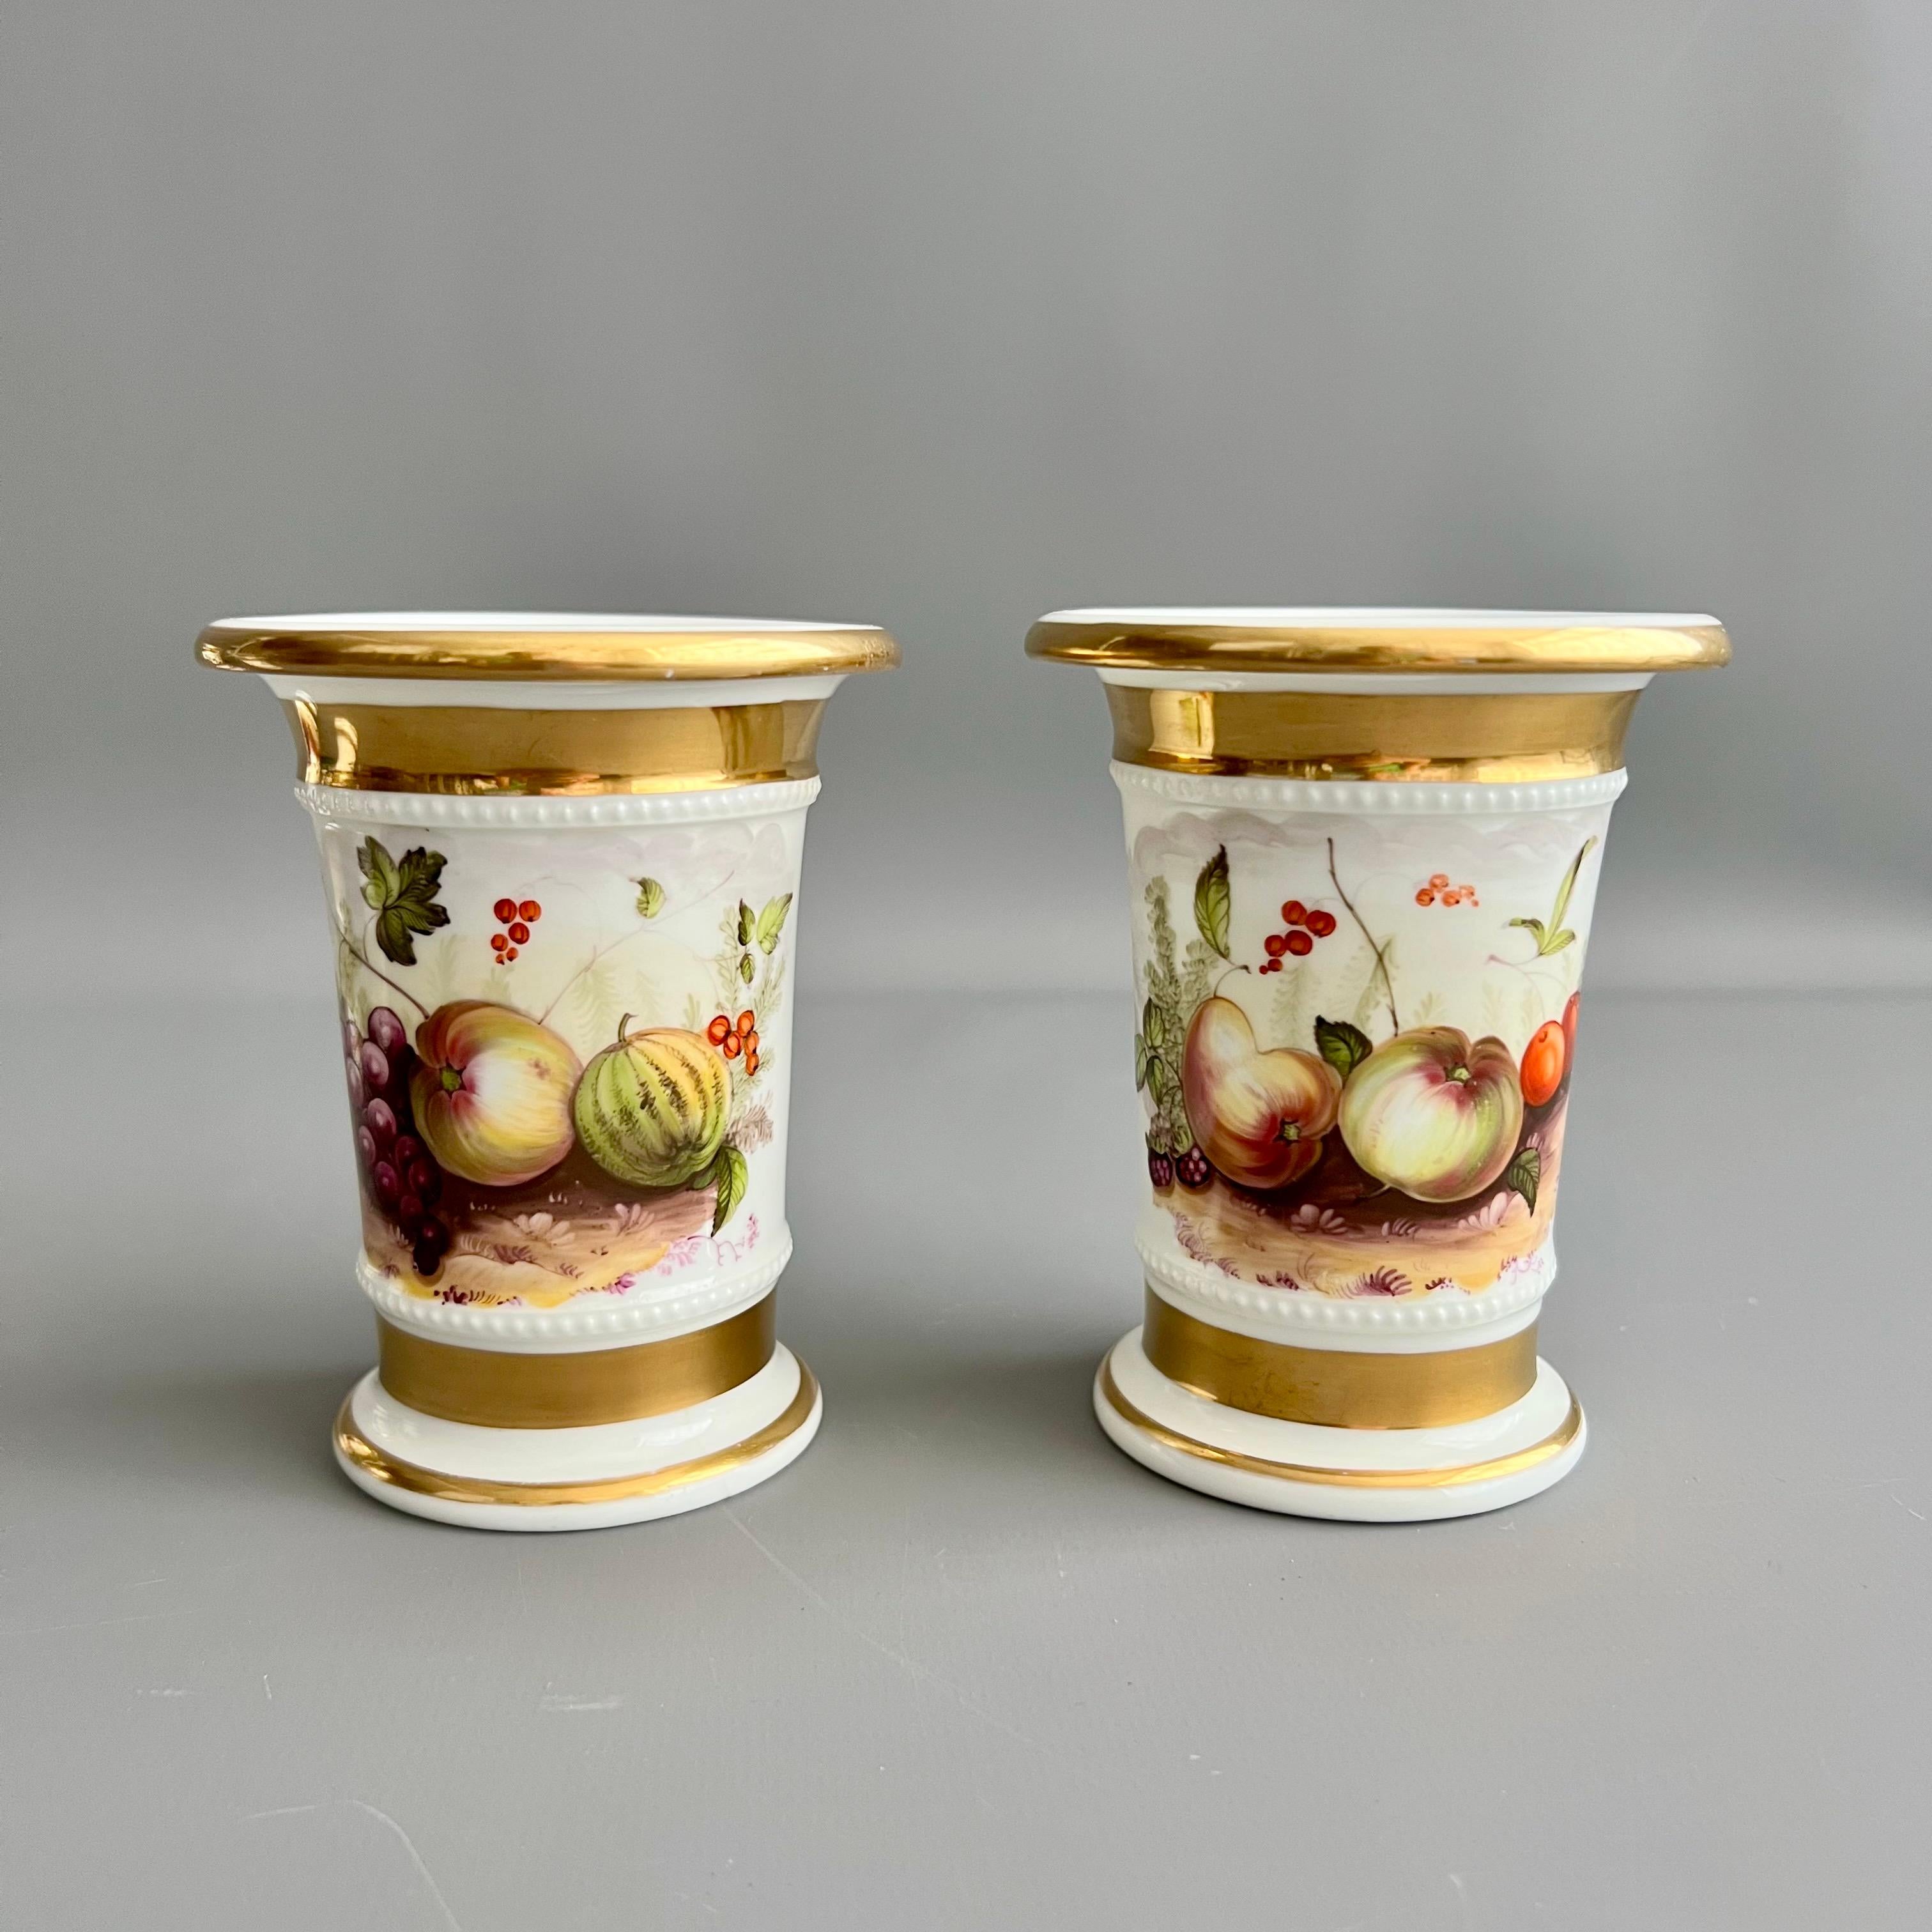 English Garniture of 5 Porcelain Vases, White, Hand Painted Fruits, 1820-1825 For Sale 2